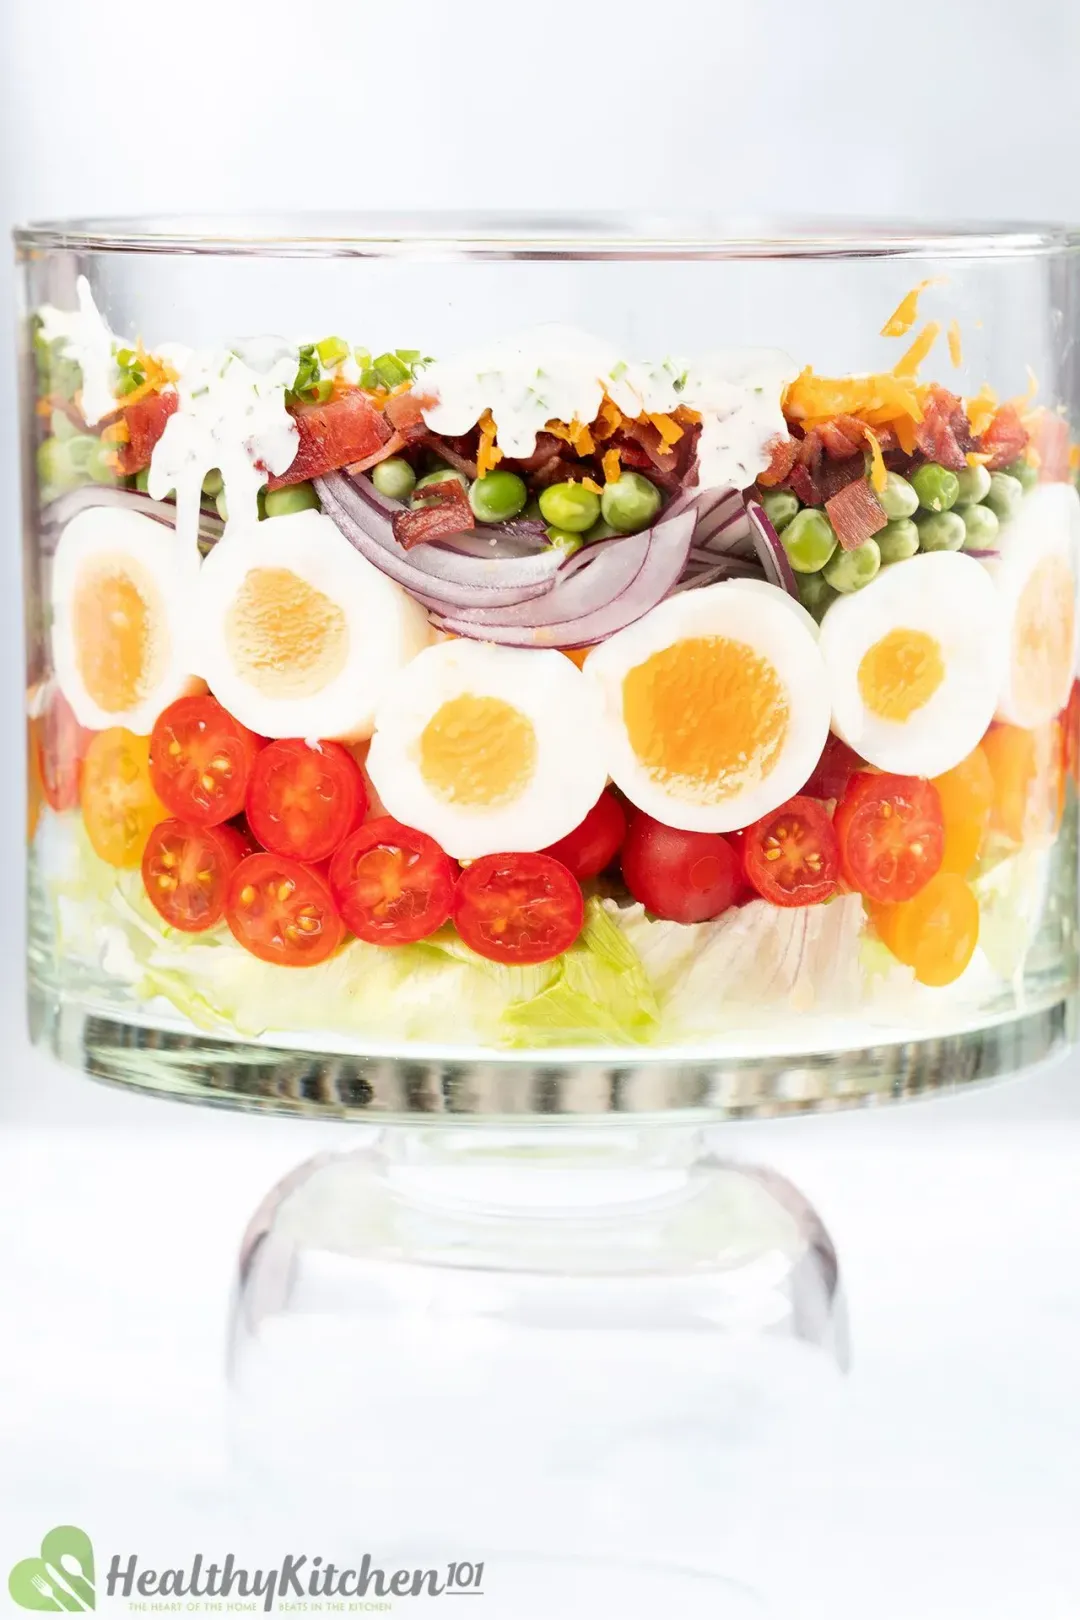 How to Store Seven Layer Salad